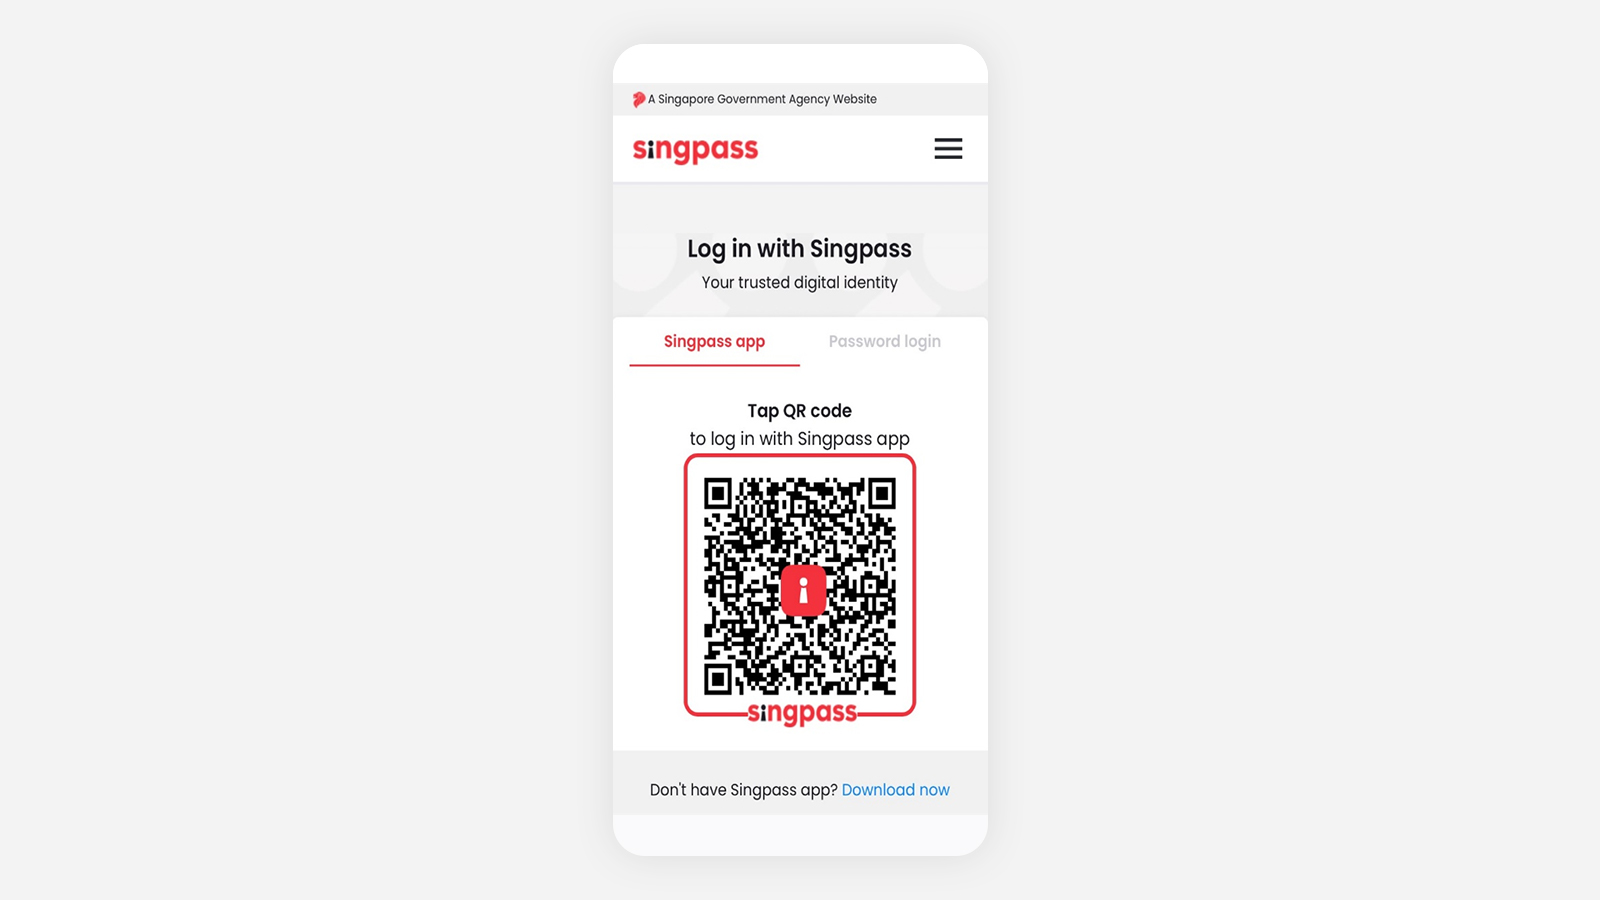 Login in with your Singpass credentials